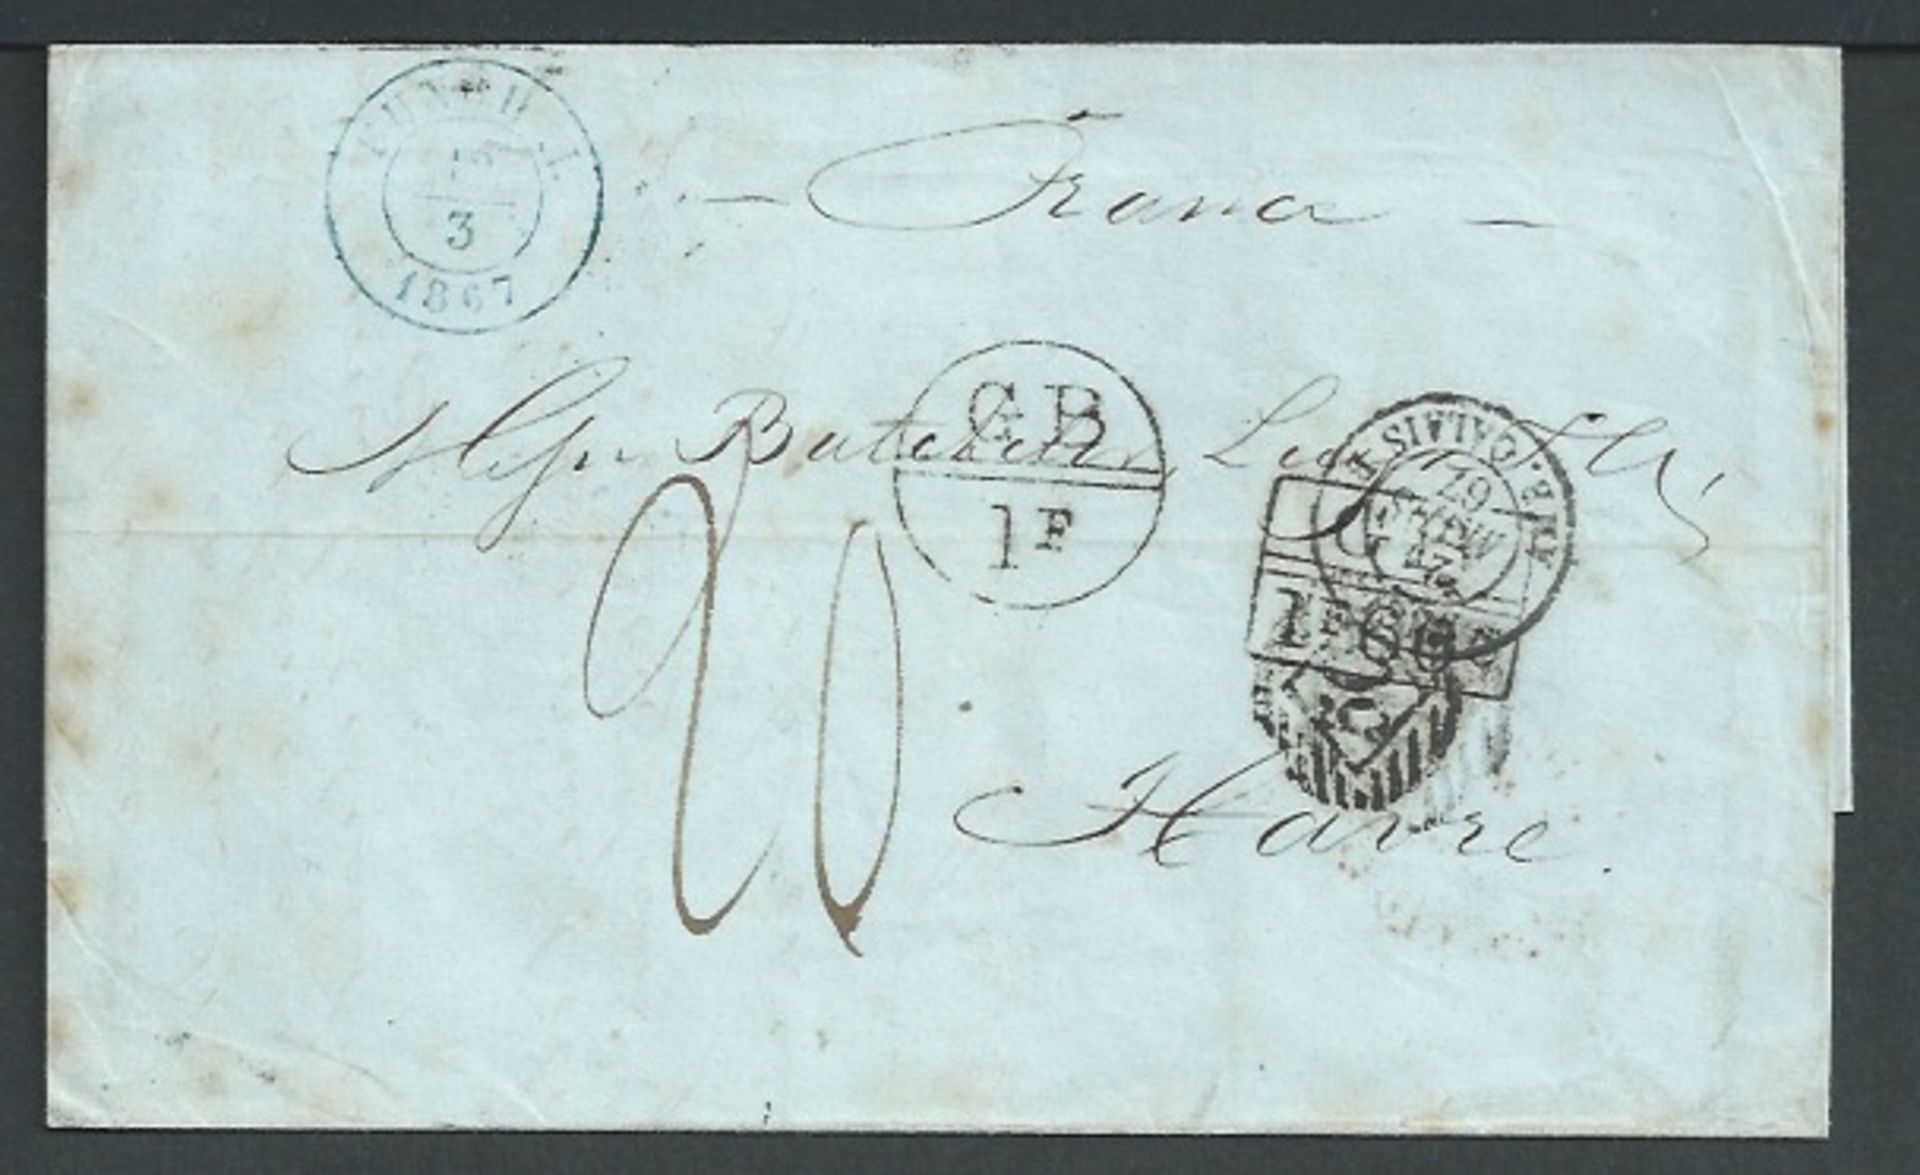 Accountant Marks / Madeira 1867 Entire from Maderia to France via England, with datestamps of "FUNCH